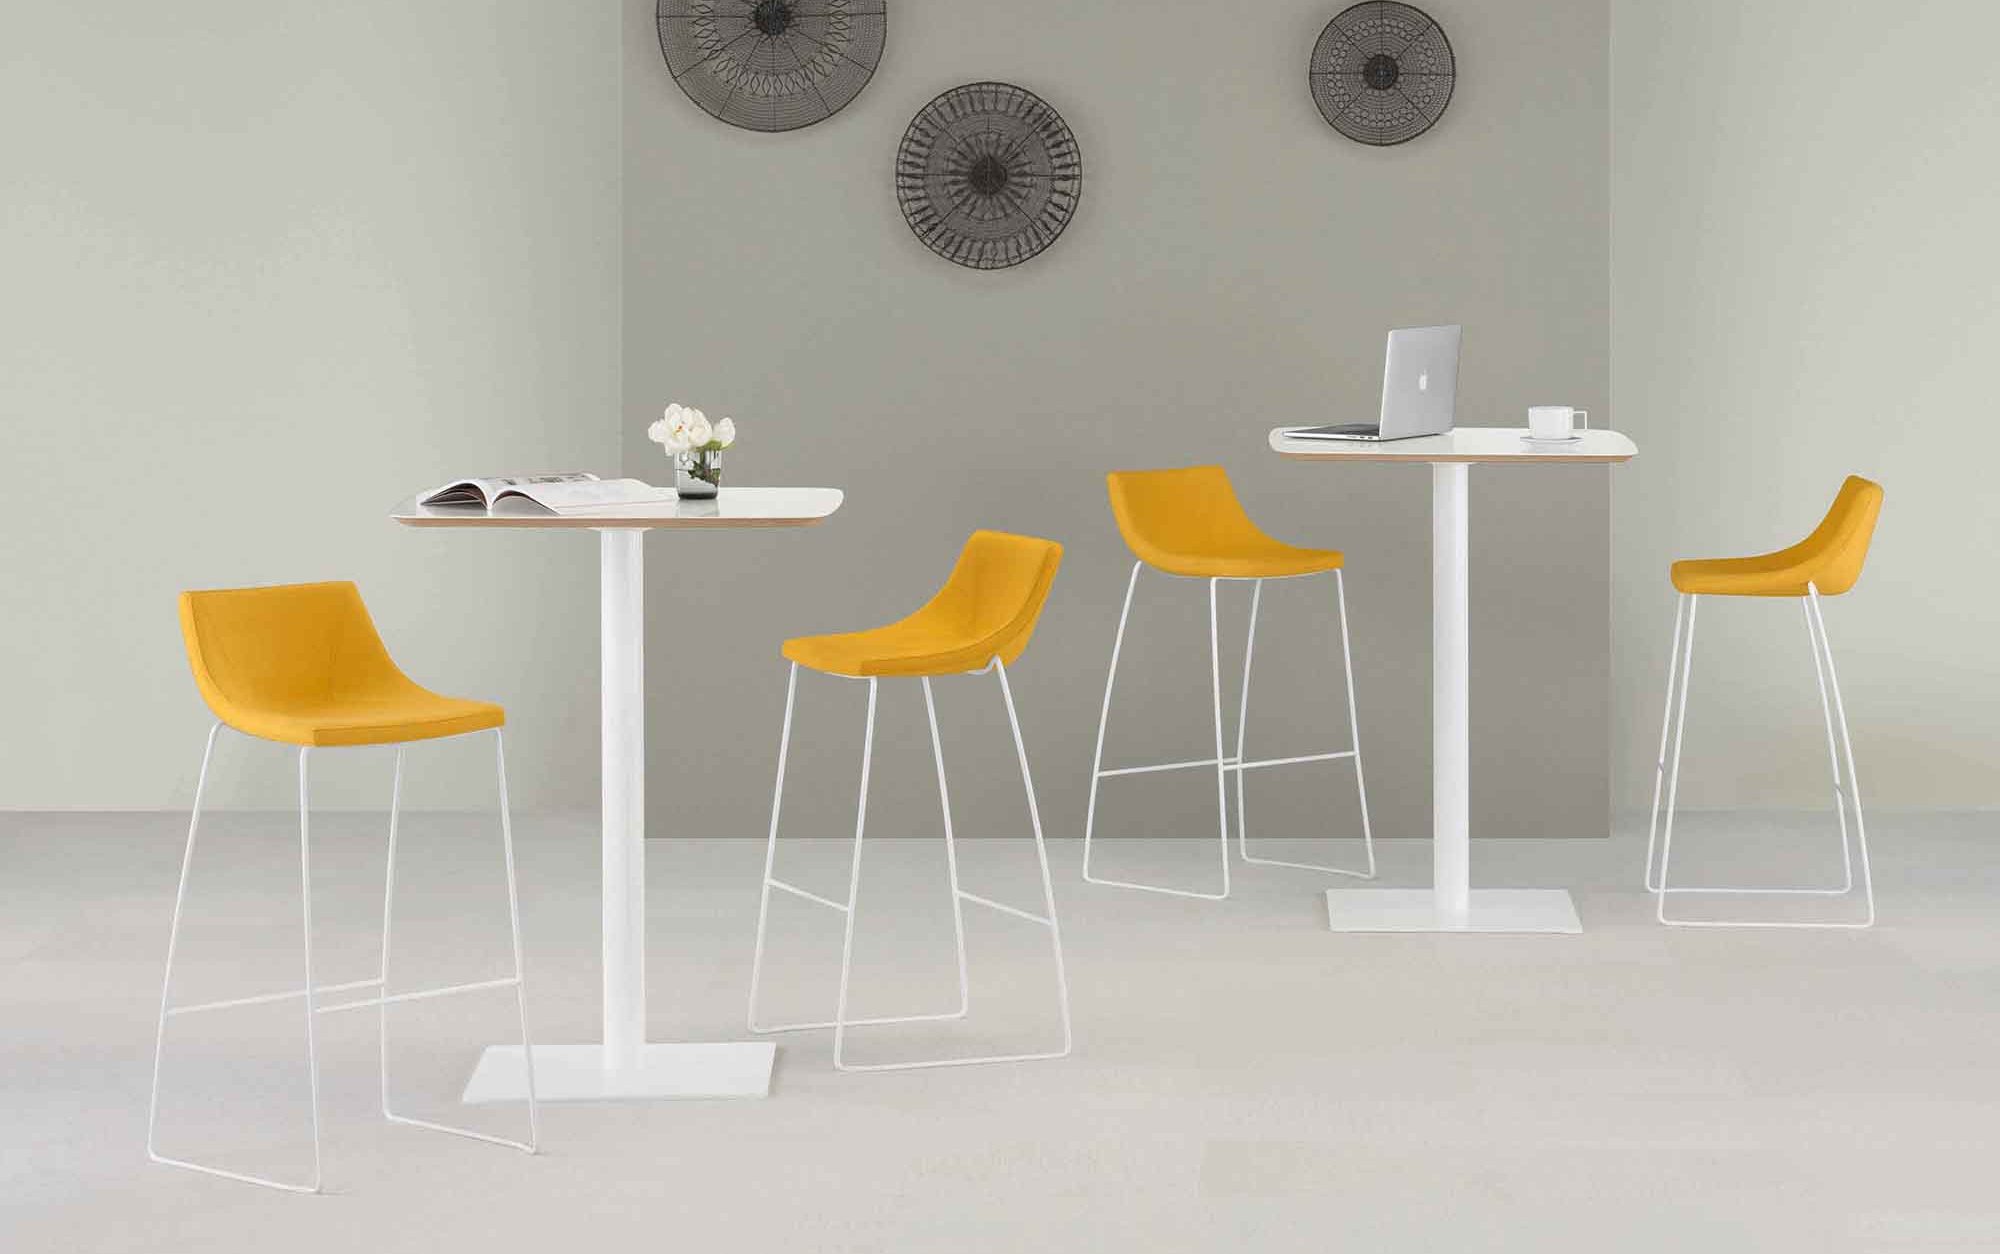 Skyline Meeting Table, Bar Height with Chirp Stools